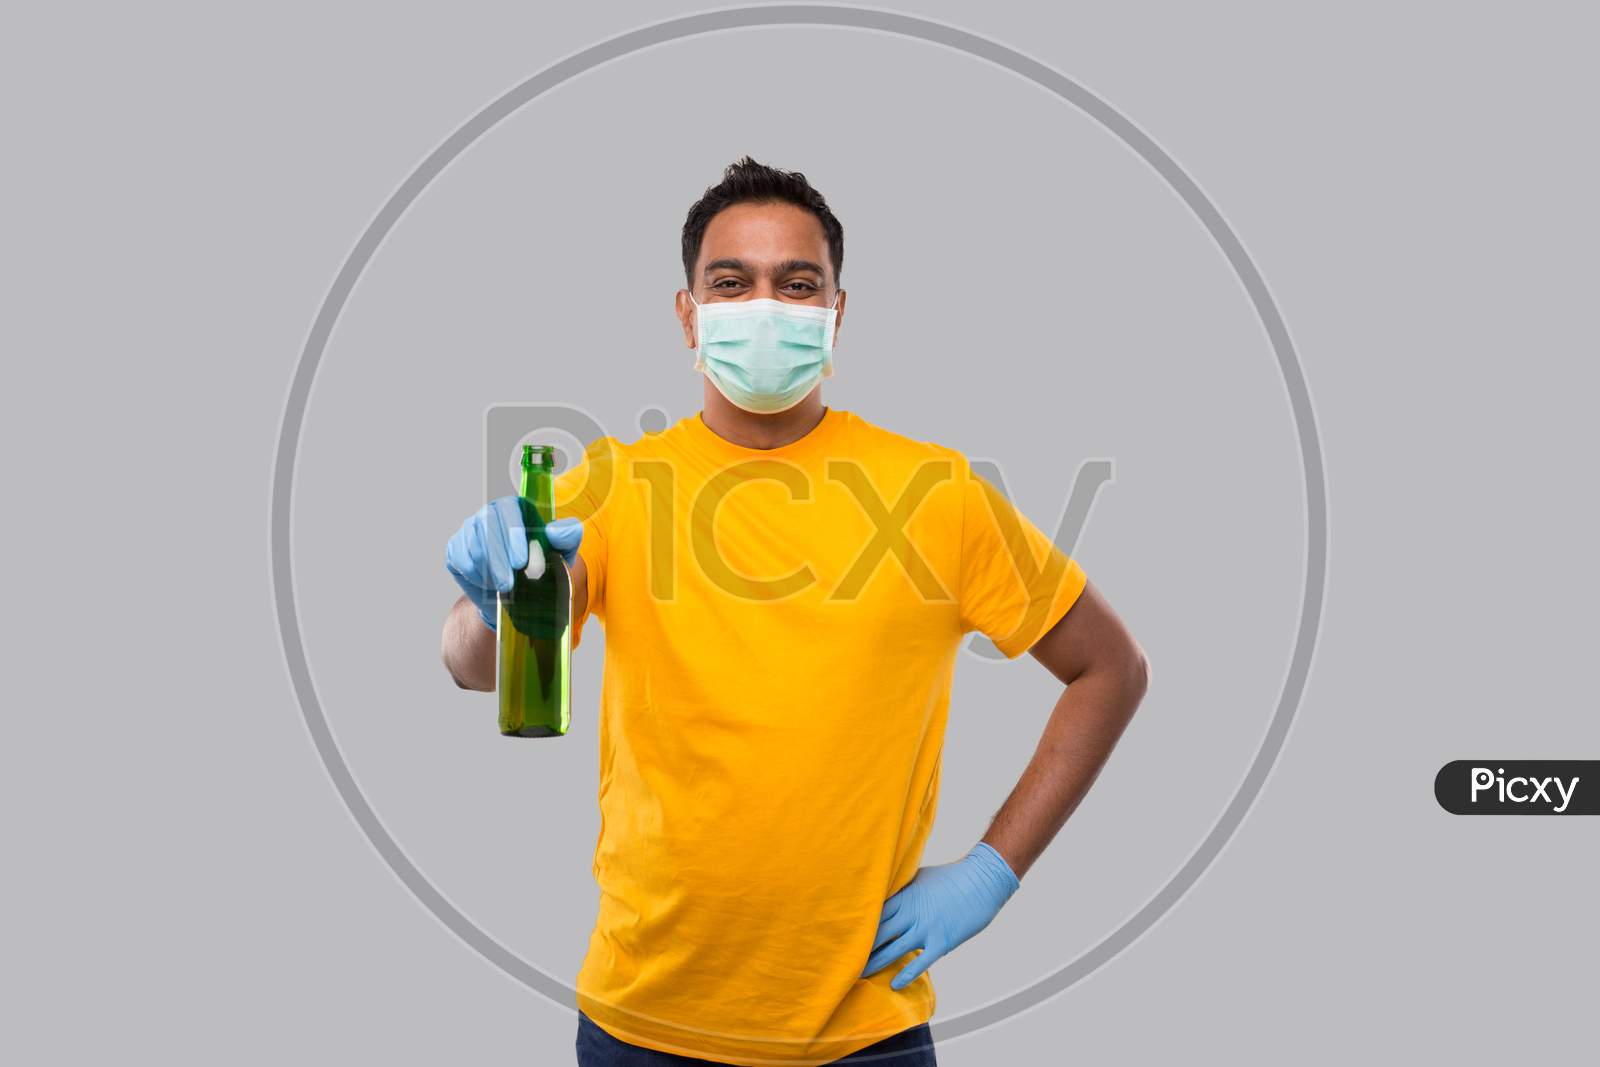 Indian Man Holding Beer Bottle Wearing Medical Mask And Gloves Isolated.